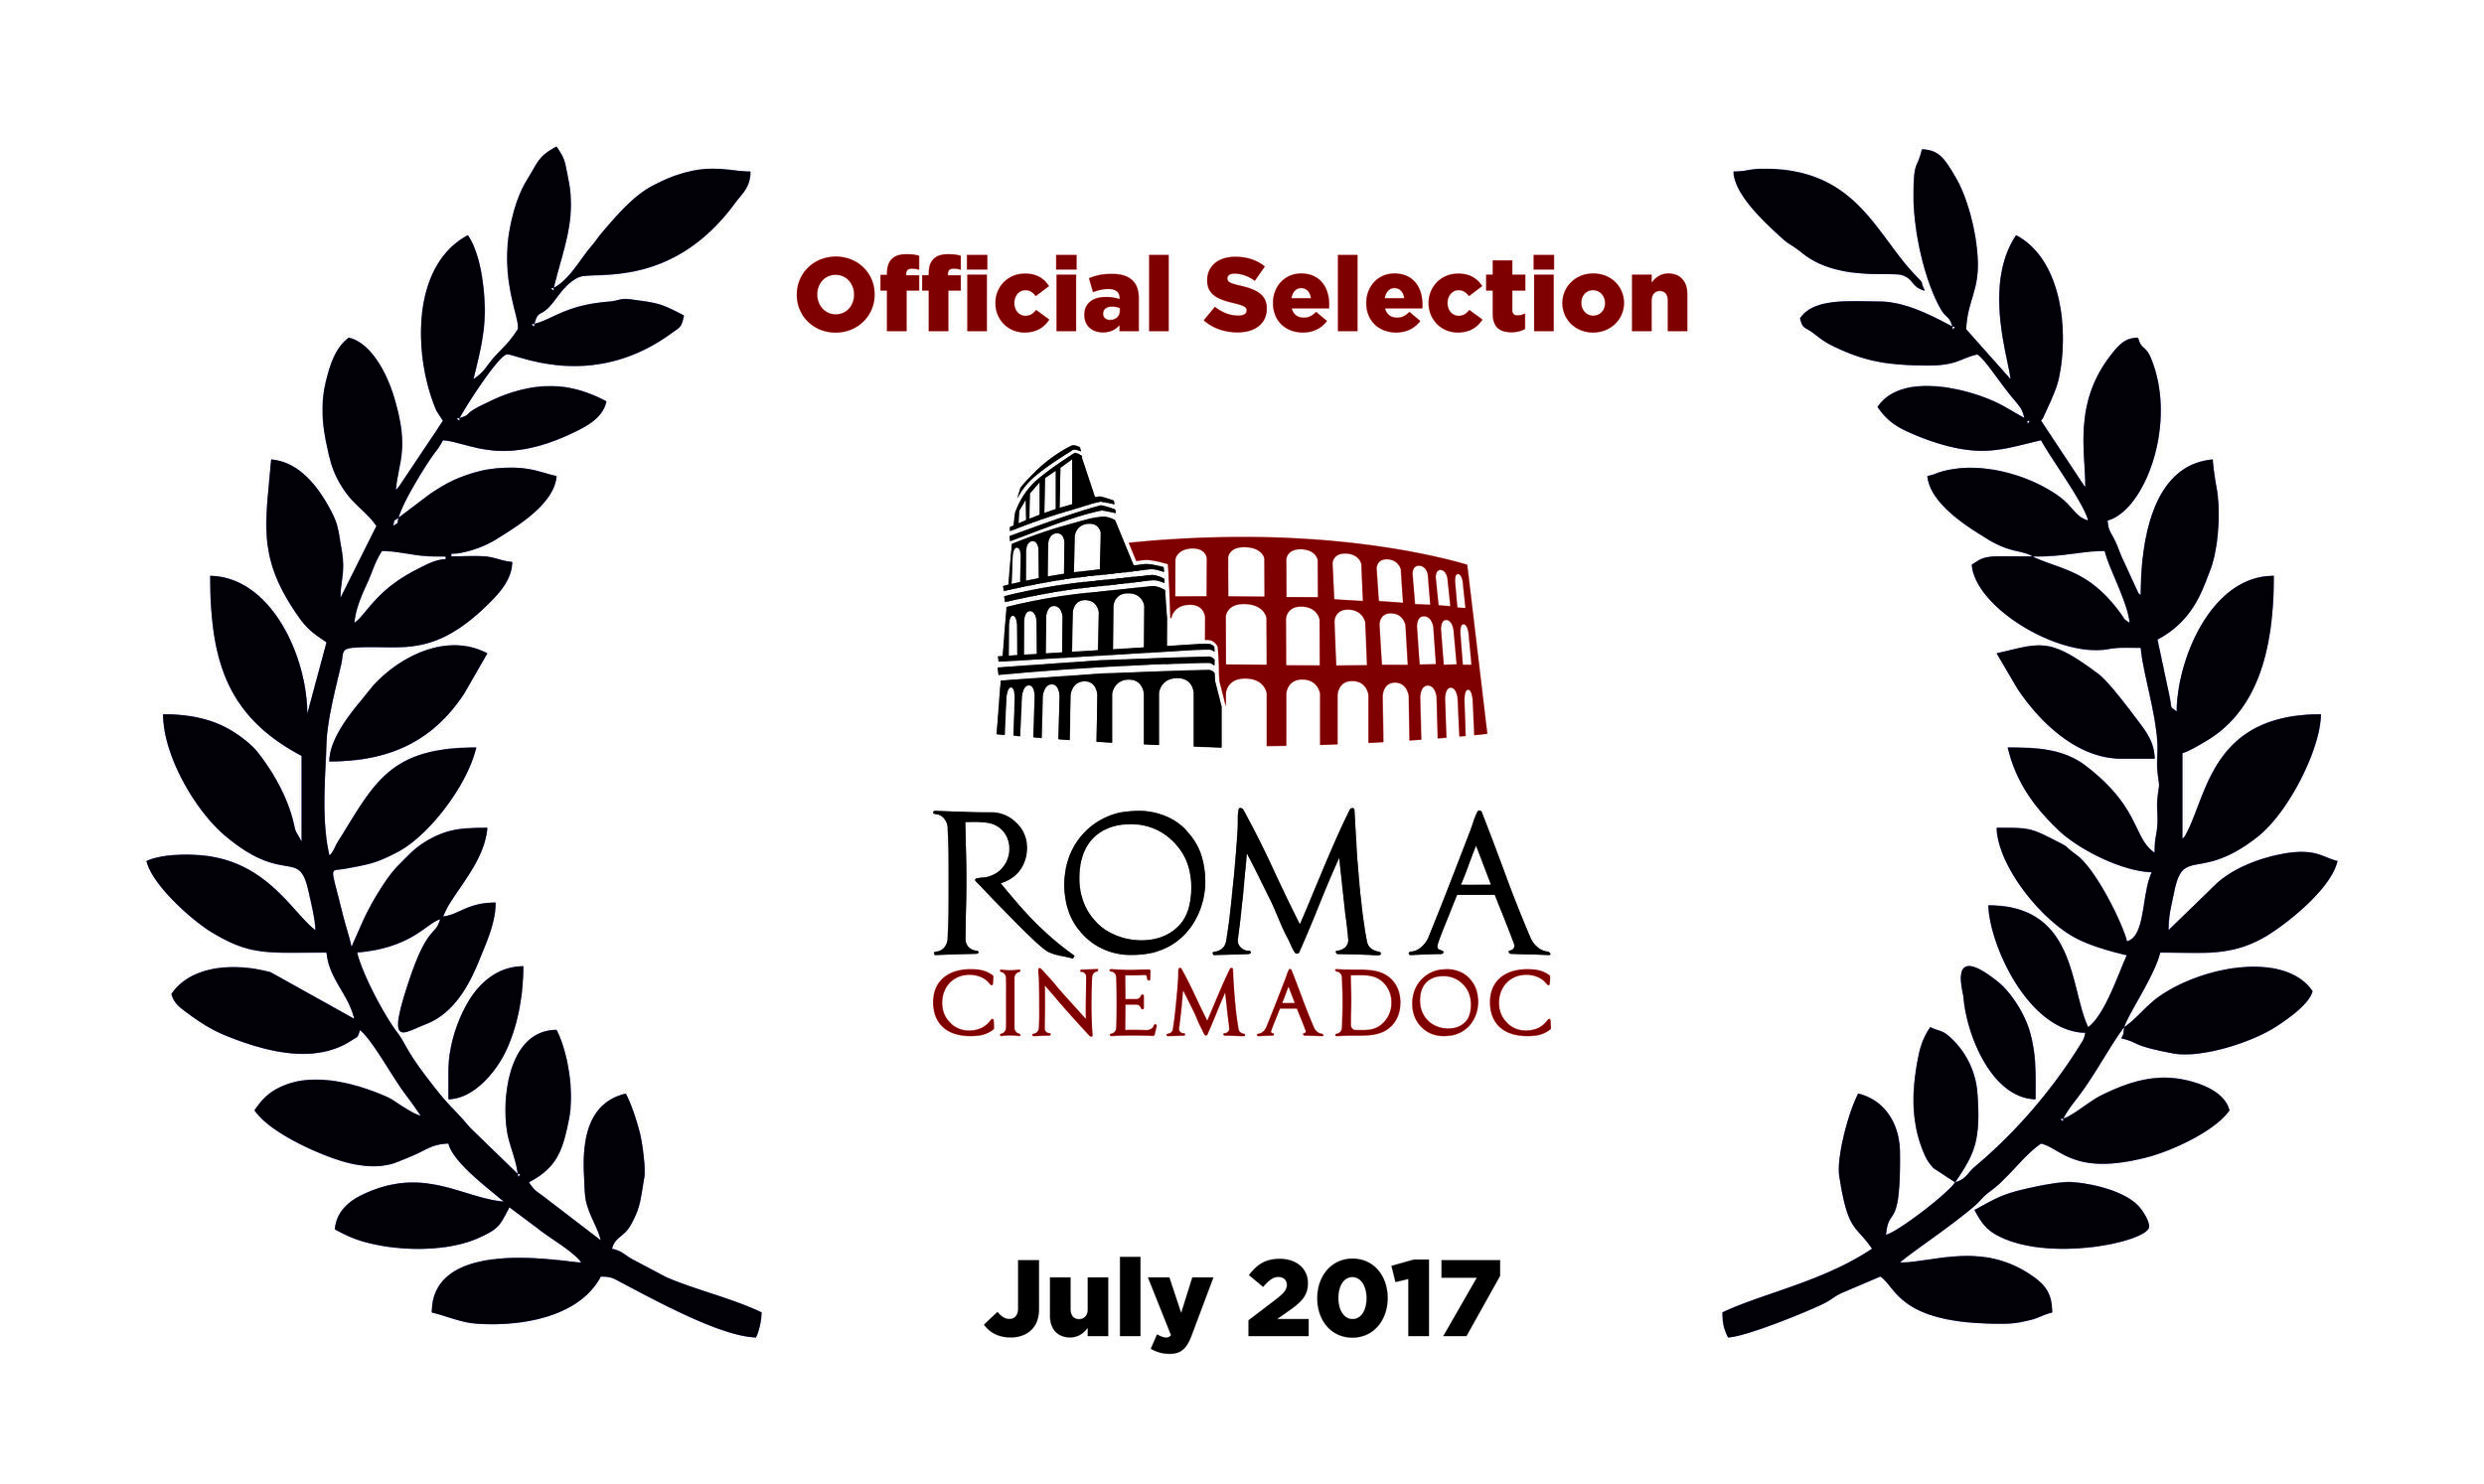 roma-cinemadoc-official-selection-july-2017.jpg